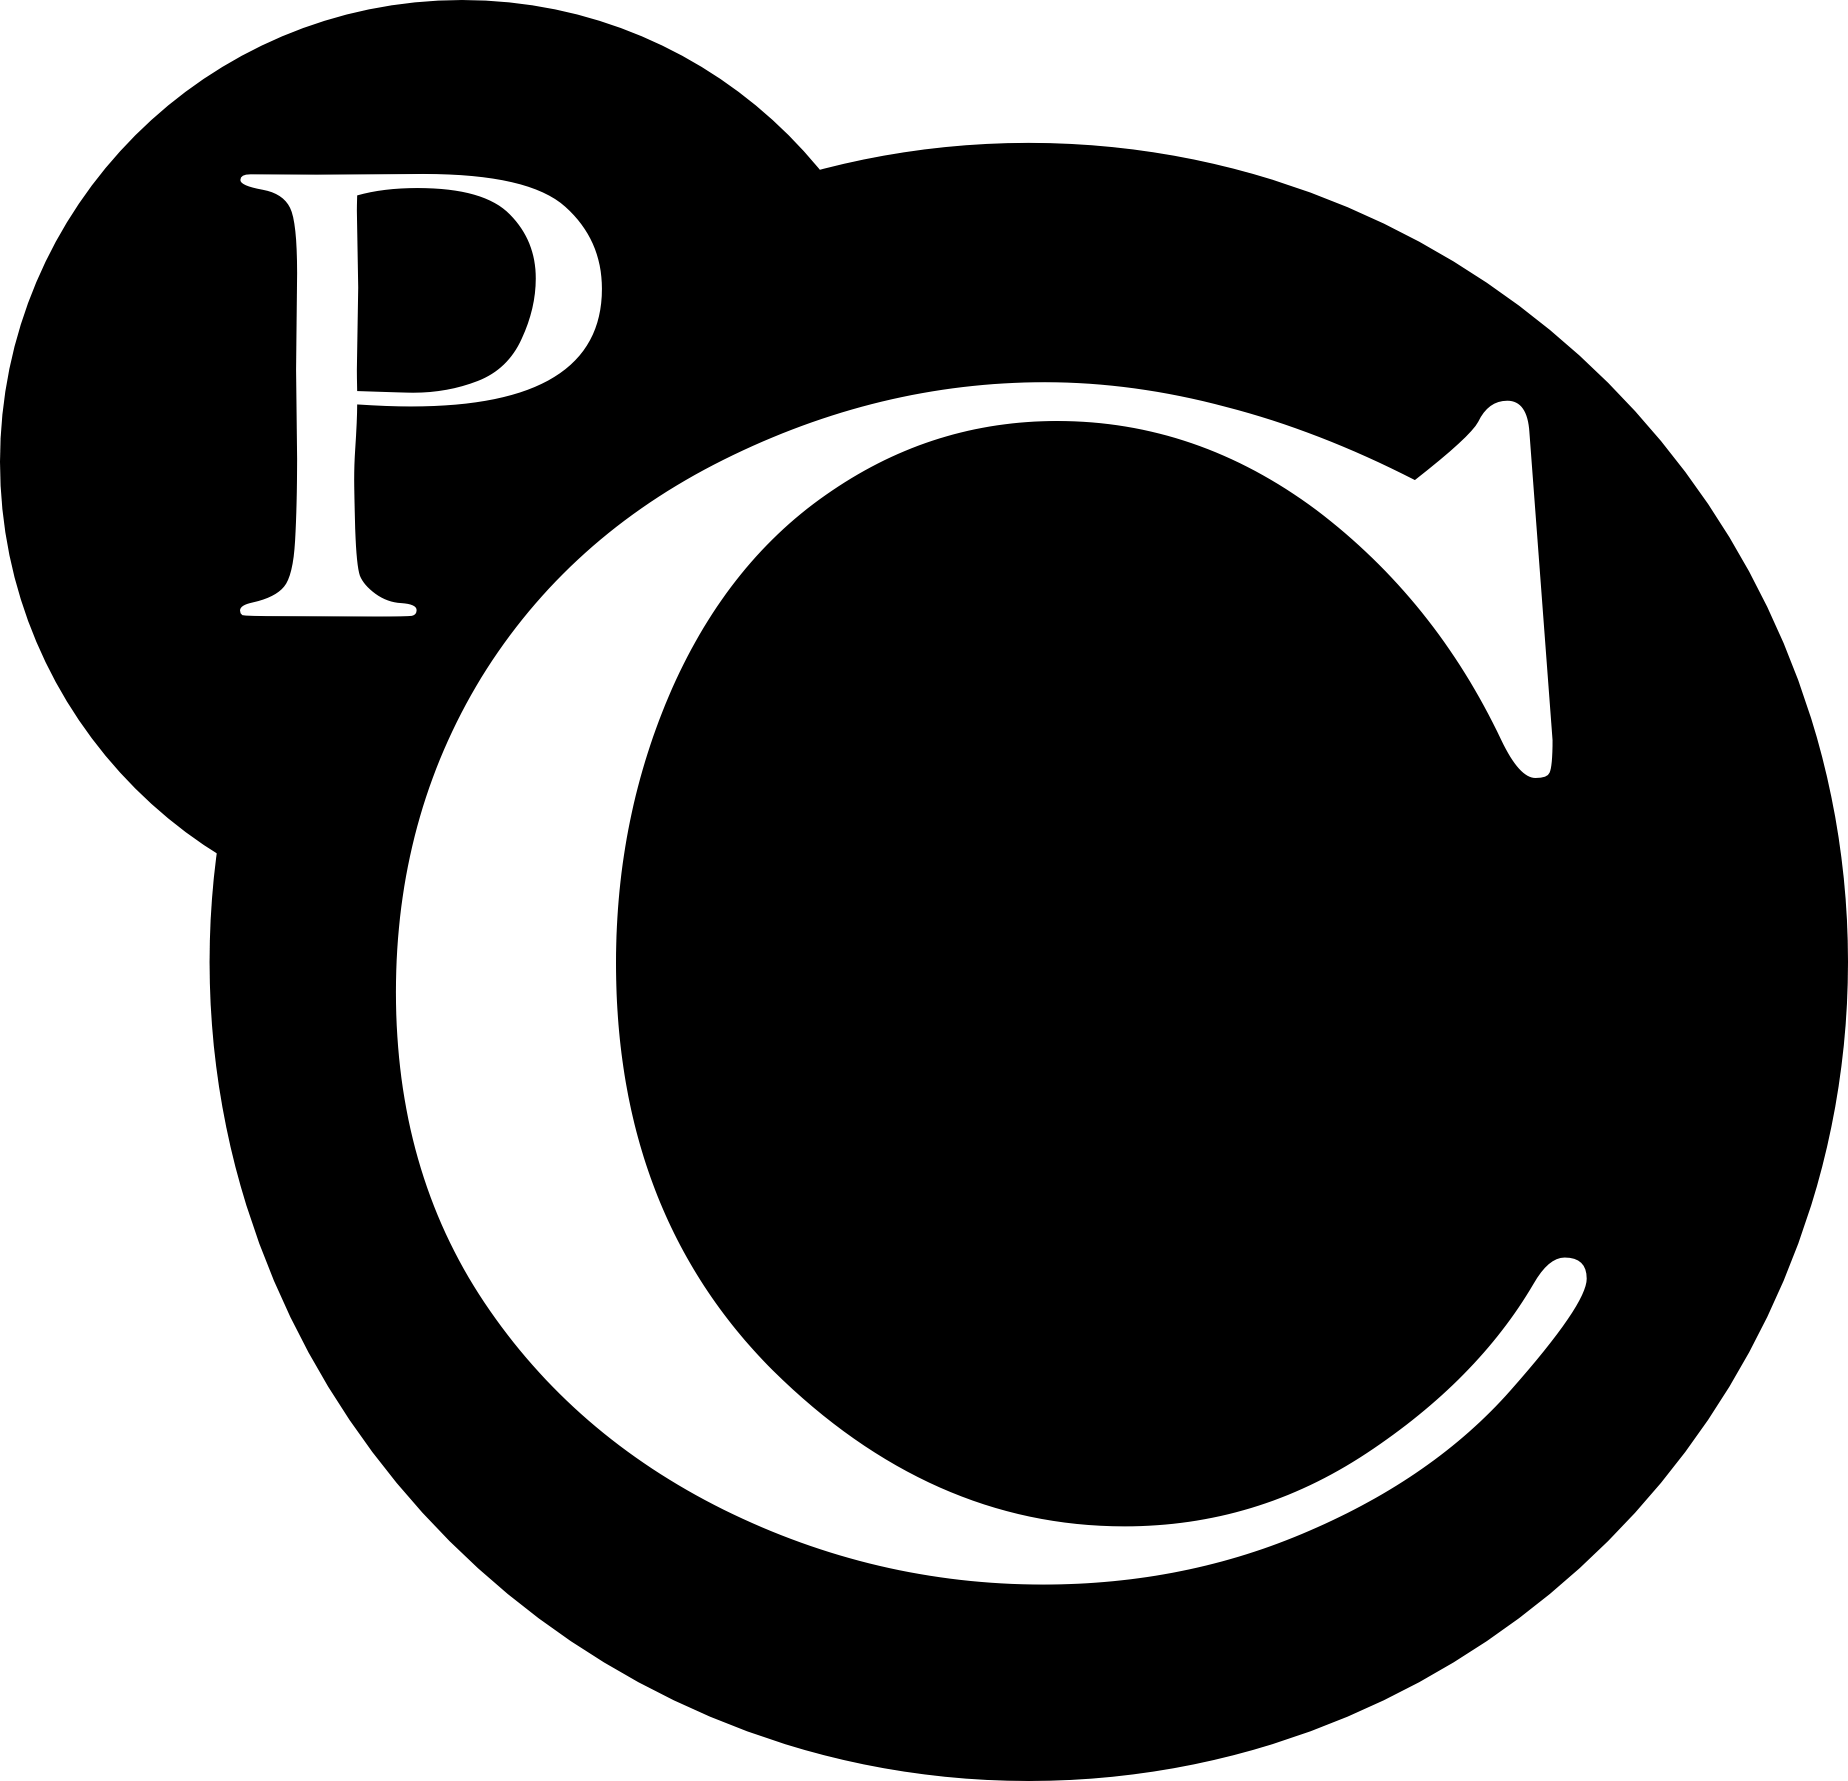 Cool PC Logo - Pure Coincidence Magazine | Magazine for Flash Fiction, Prose Poetry ...